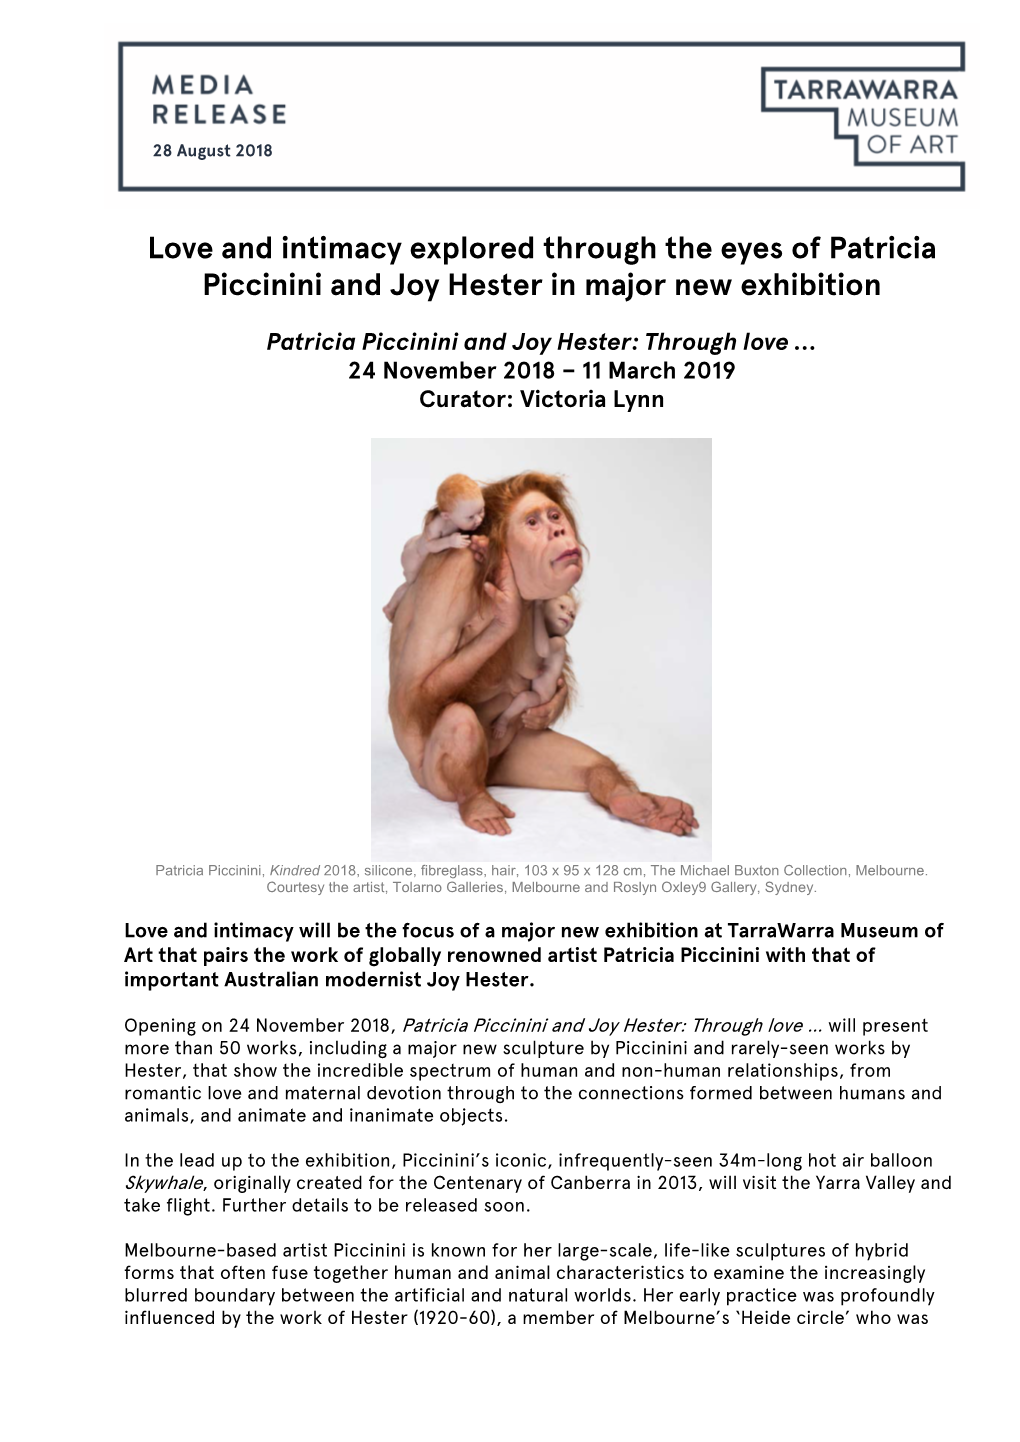 Love and Intimacy Explored Through the Eyes of Patricia Piccinini and Joy Hester in Major New Exhibition